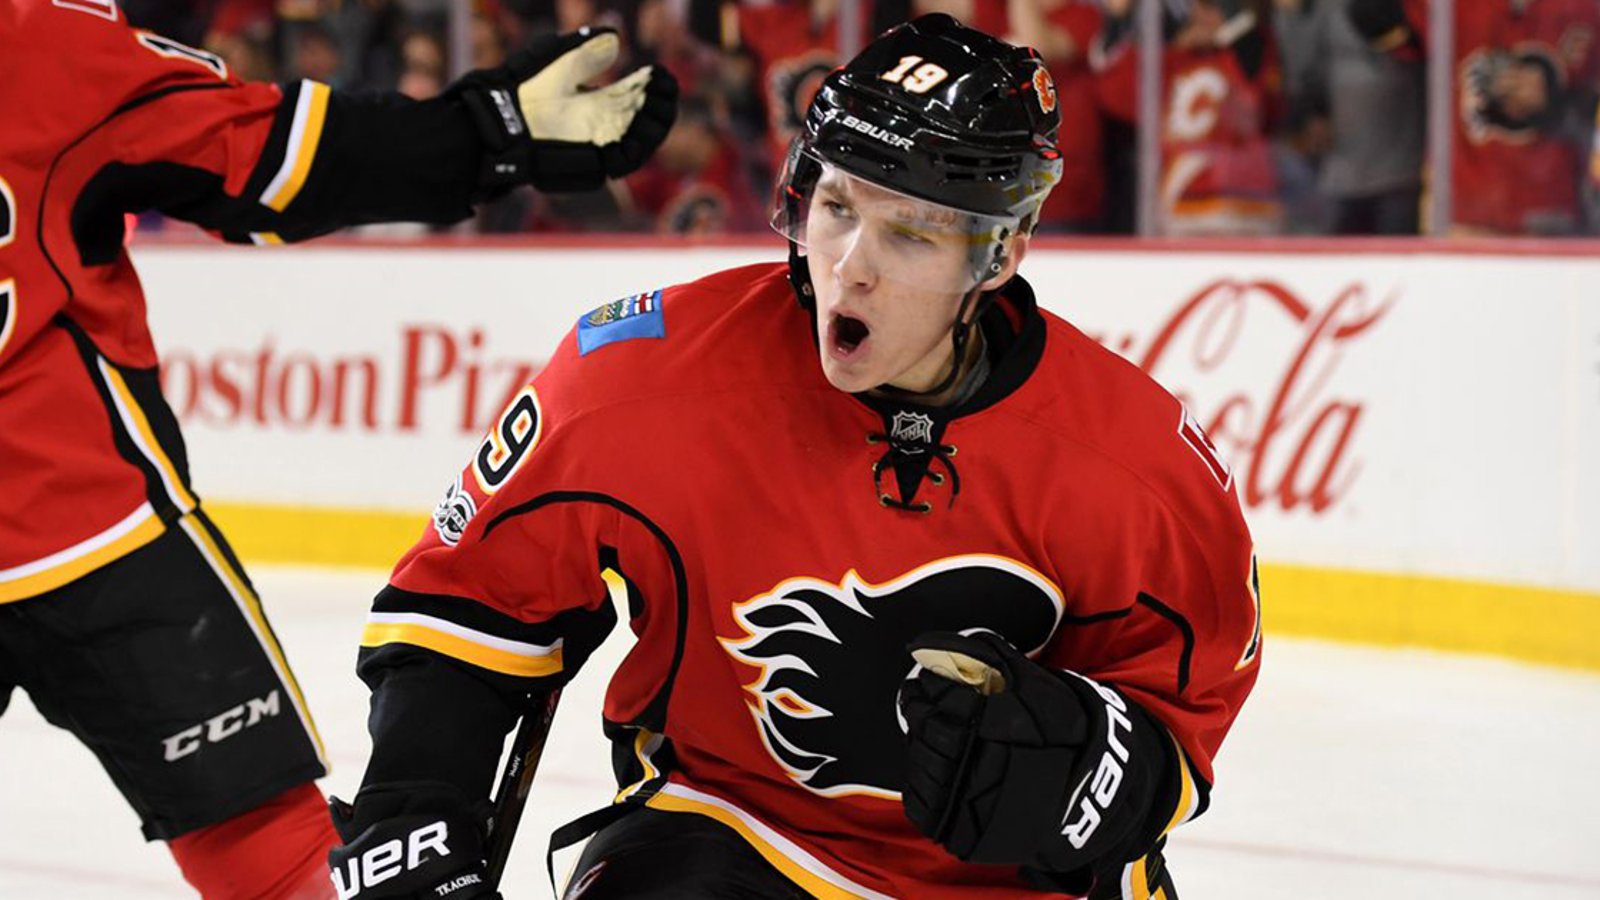 Matthews has surprising comments for Flames’ Tkachuk